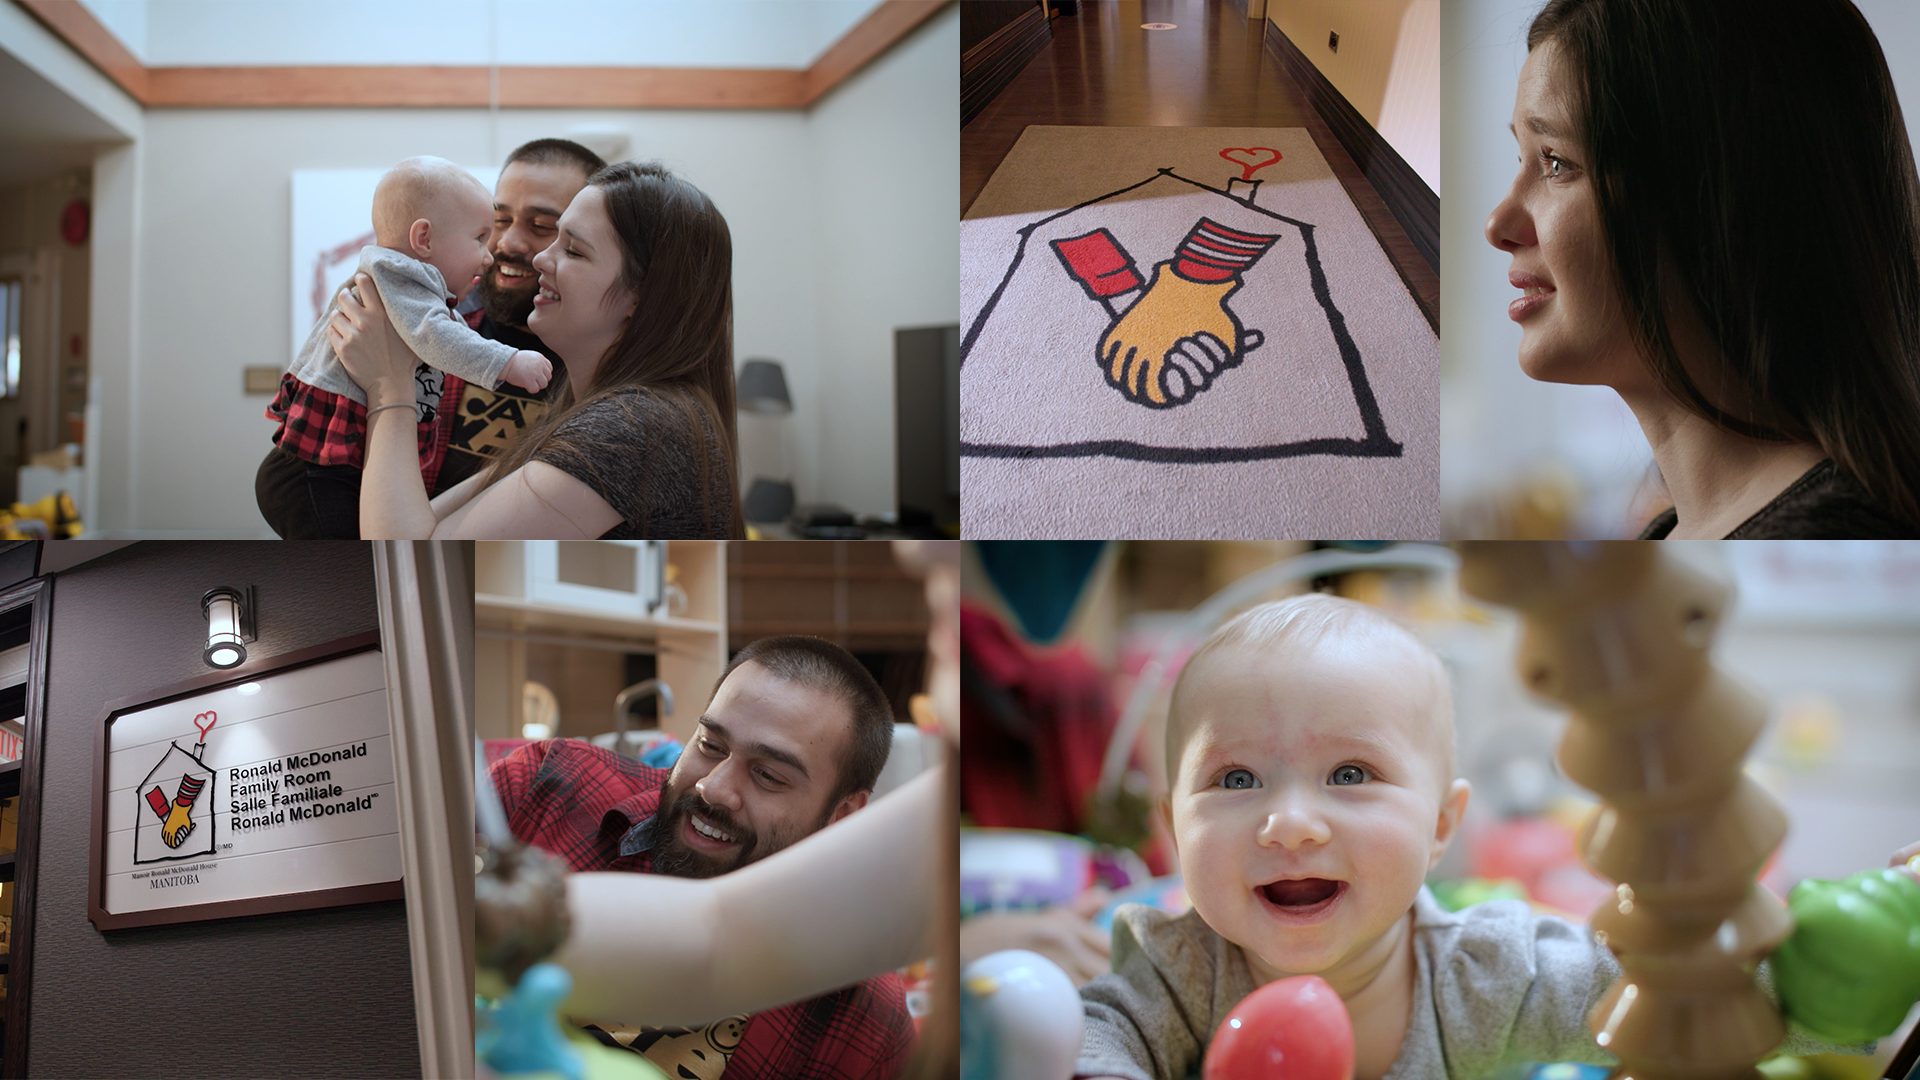 A collage of images of style frames, featuring a sign for the Ronald McDonald House Family Room, a smiling baby, and her parents holding her.